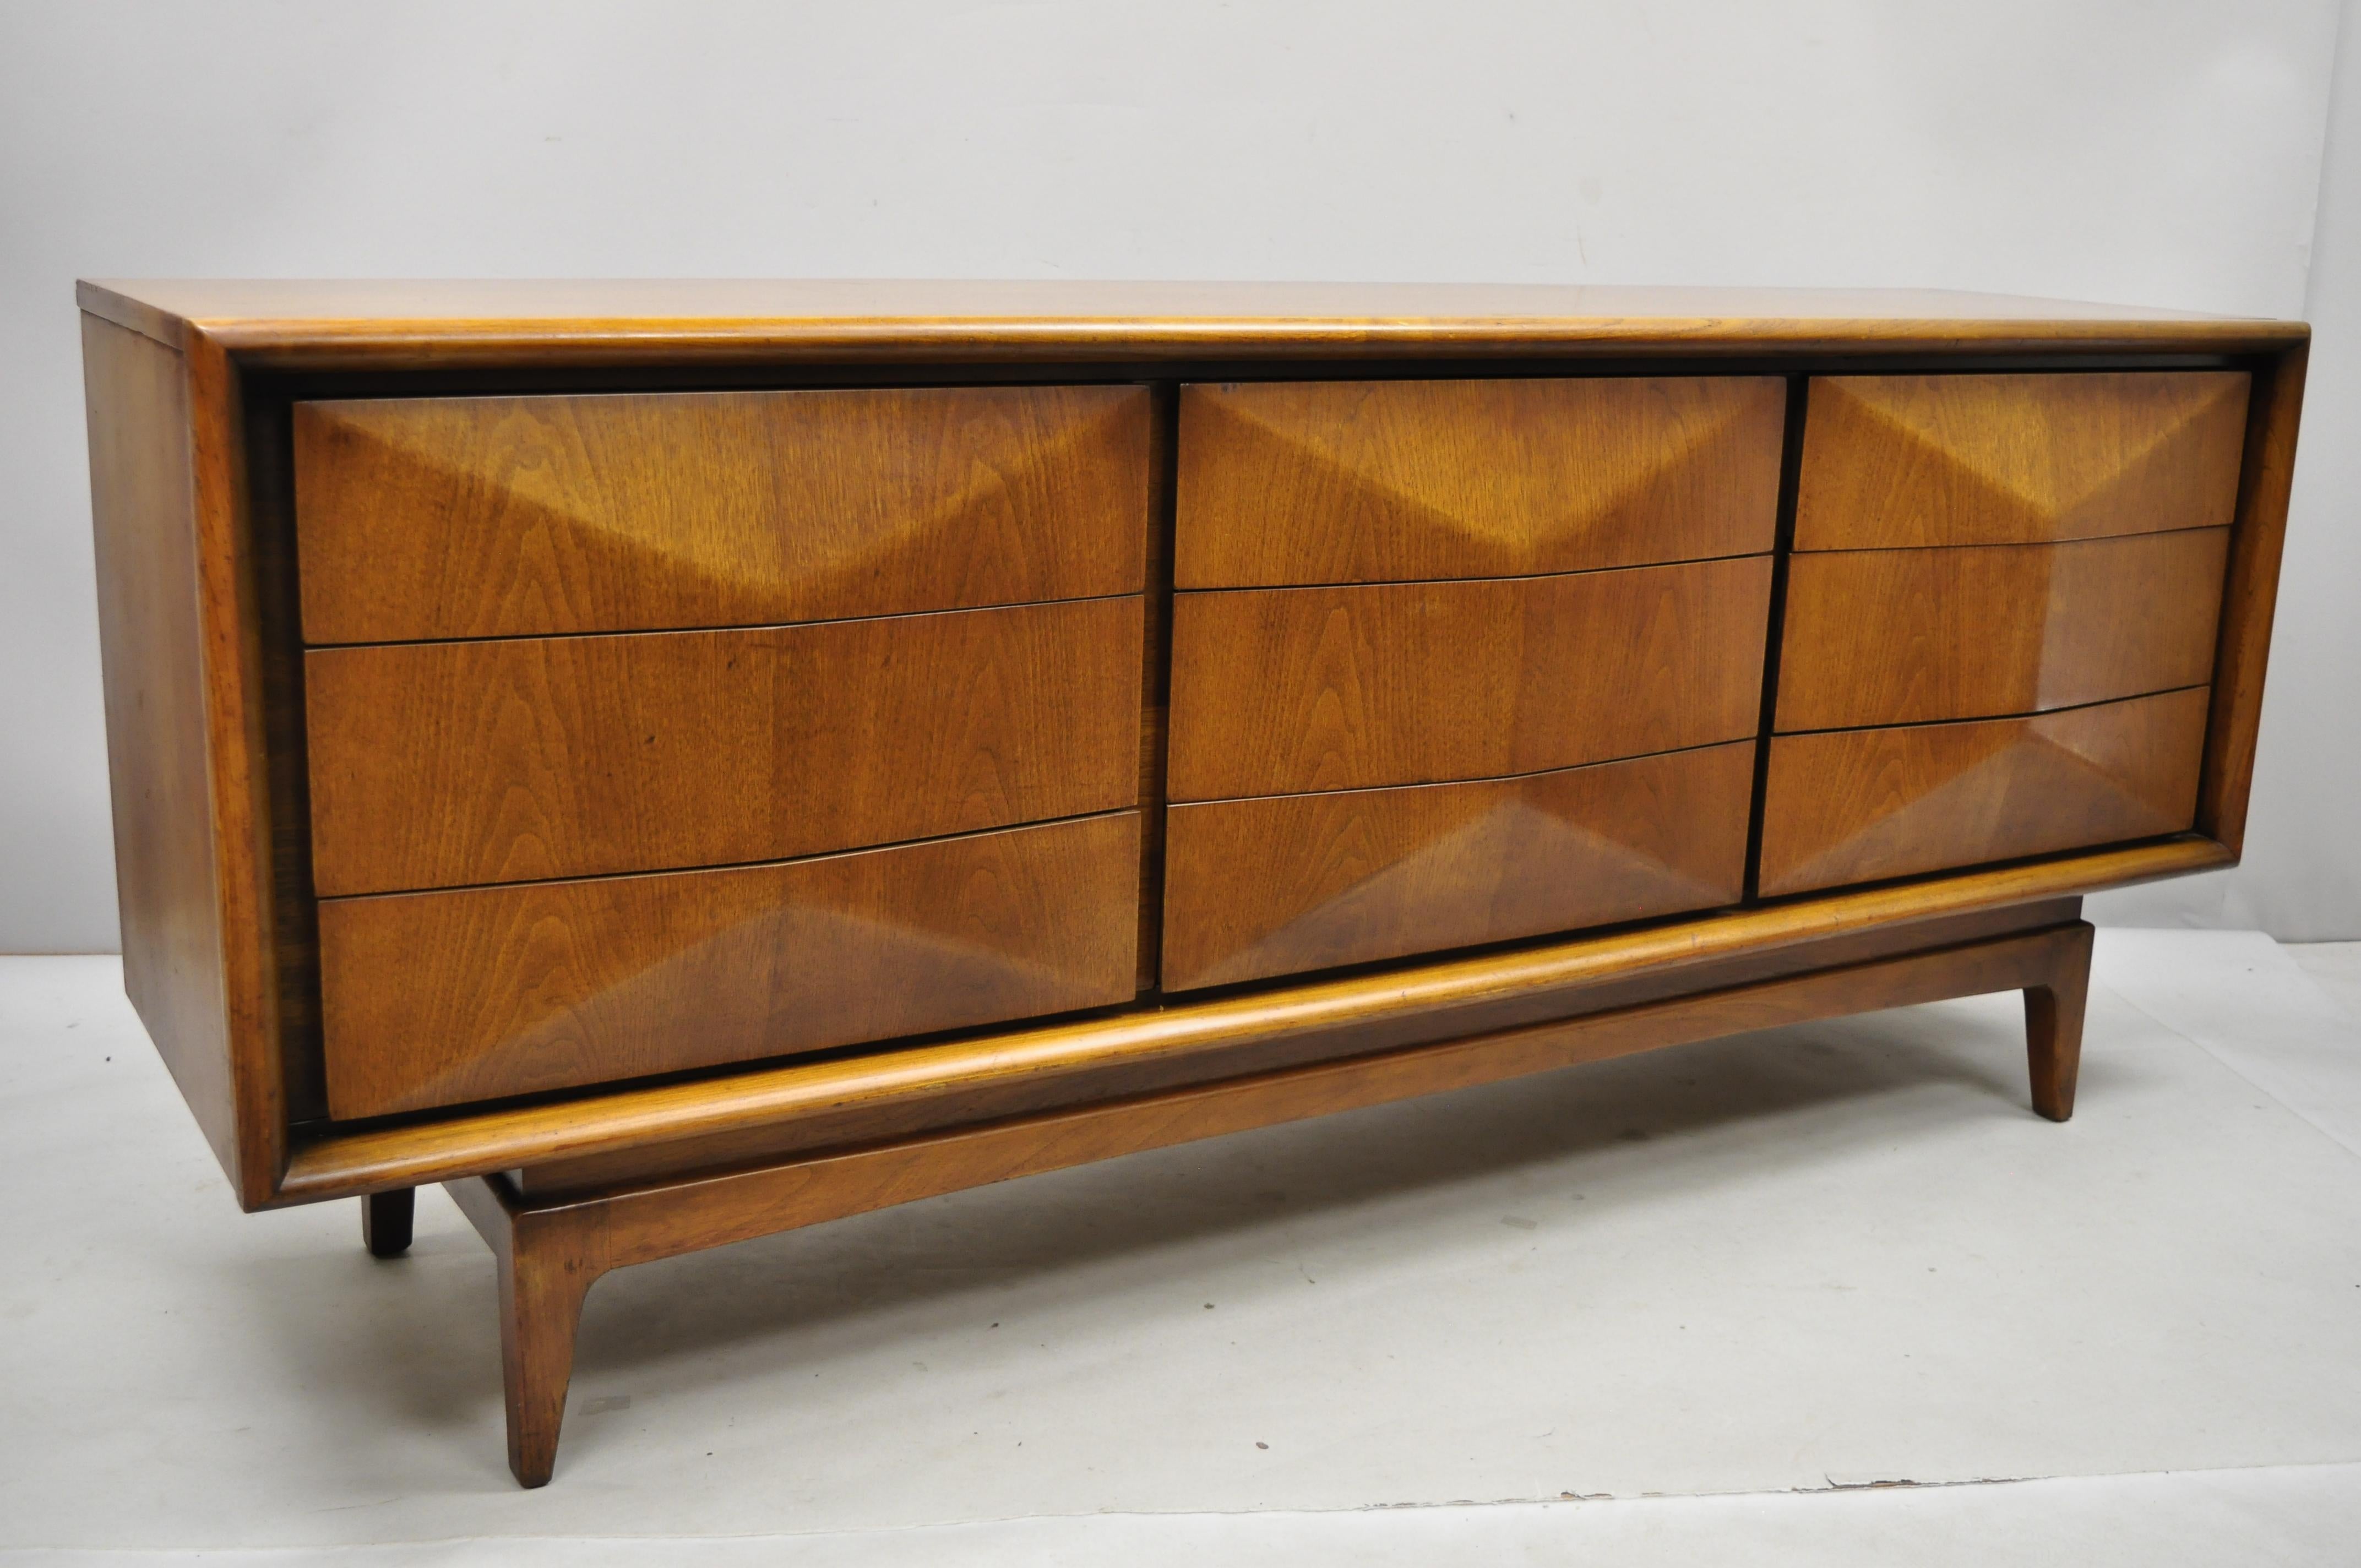 Vintage Mid-Century Modern walnut 3 dimensional 9-drawer dresser credenza. Item includes 3 dimensional diamond fronts, beautiful wood grain, 9 dovetailed drawers, tapered legs, clean modernist lines, great style and form, circa mid-20th century.